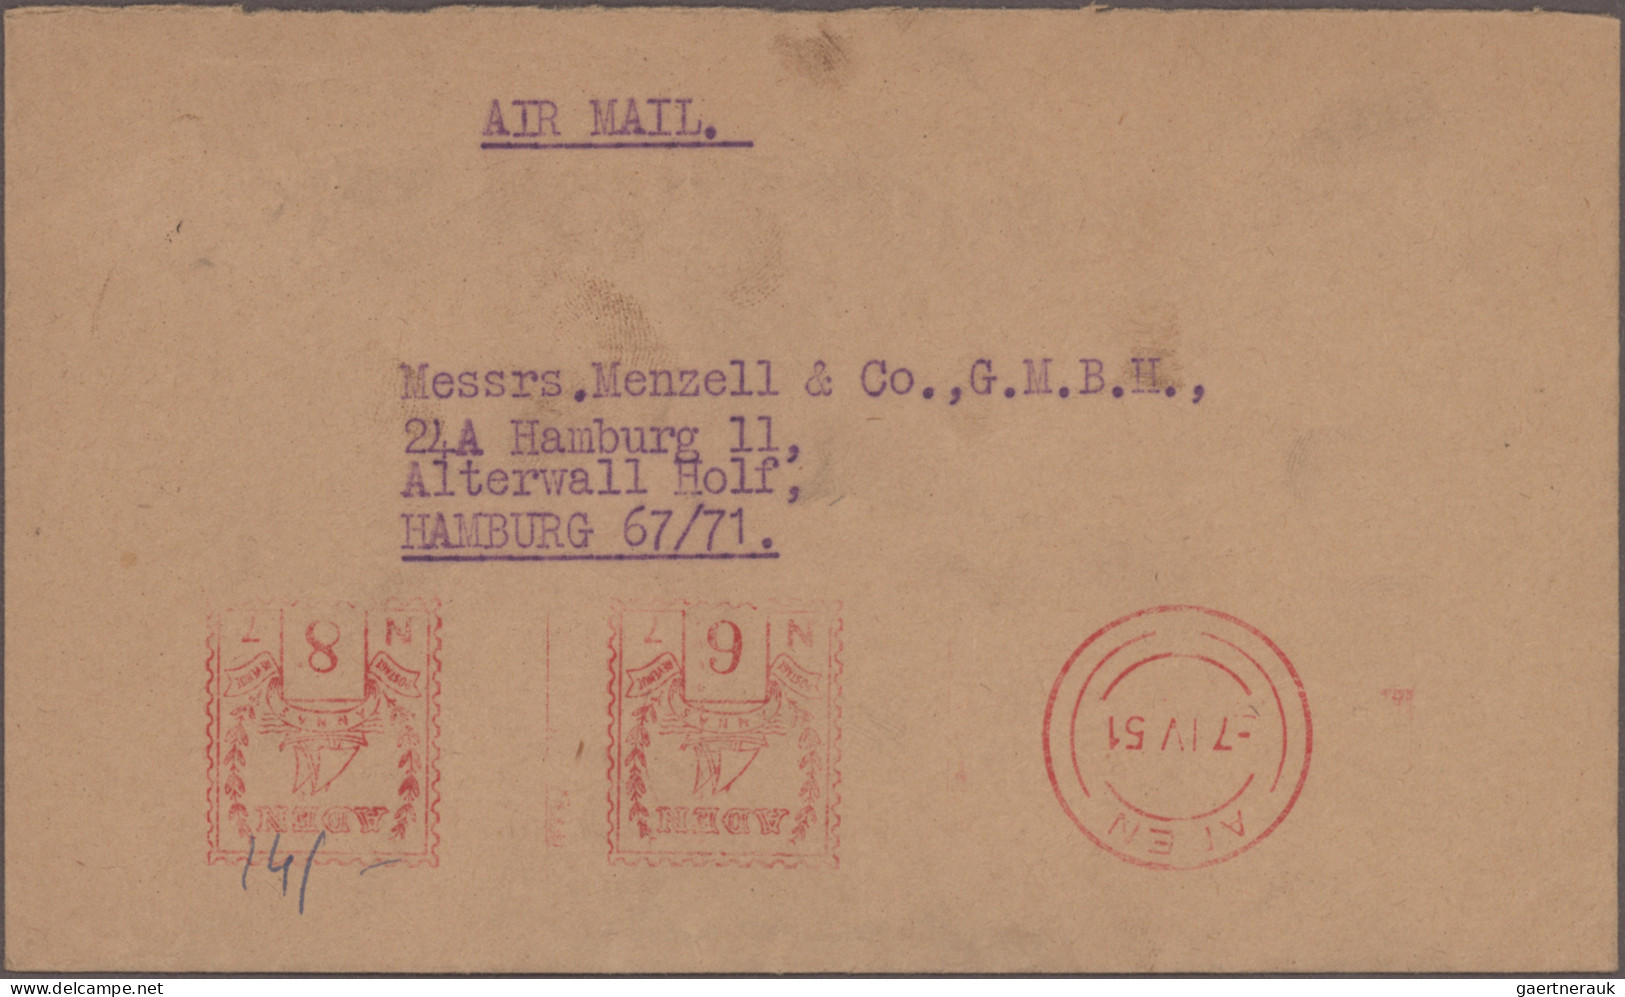 Aden: 1951/1966, METER MARKS, Lot Of Seven Commercial Covers Mainly To Germany S - Jemen